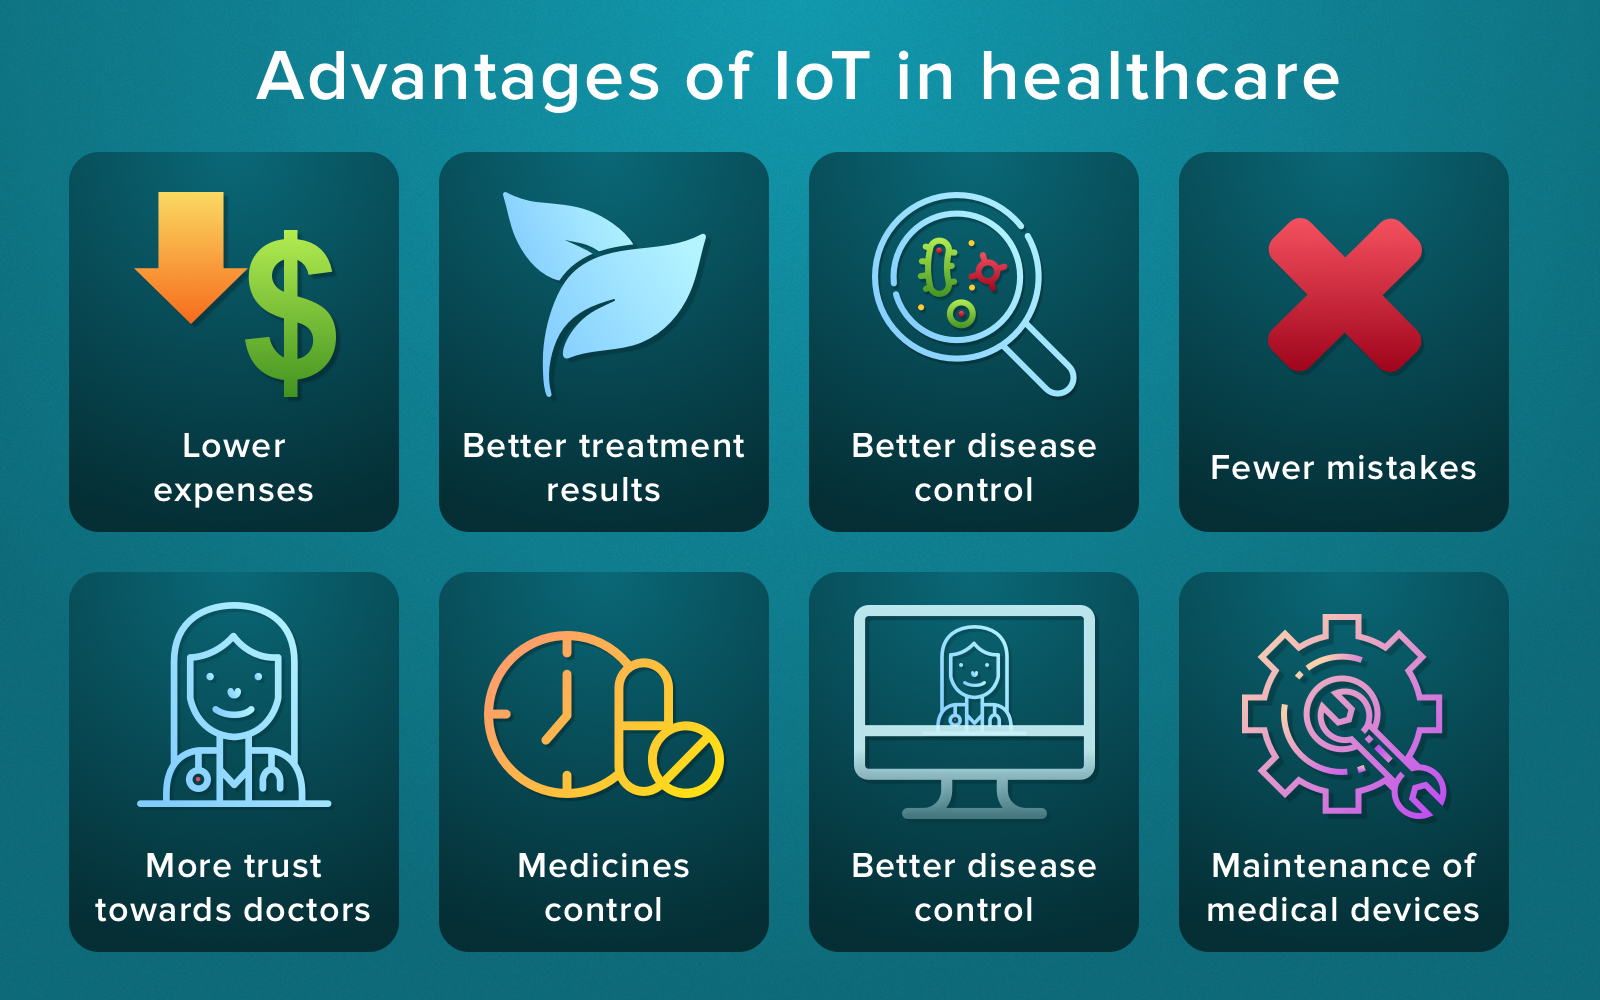 iot in healthcare